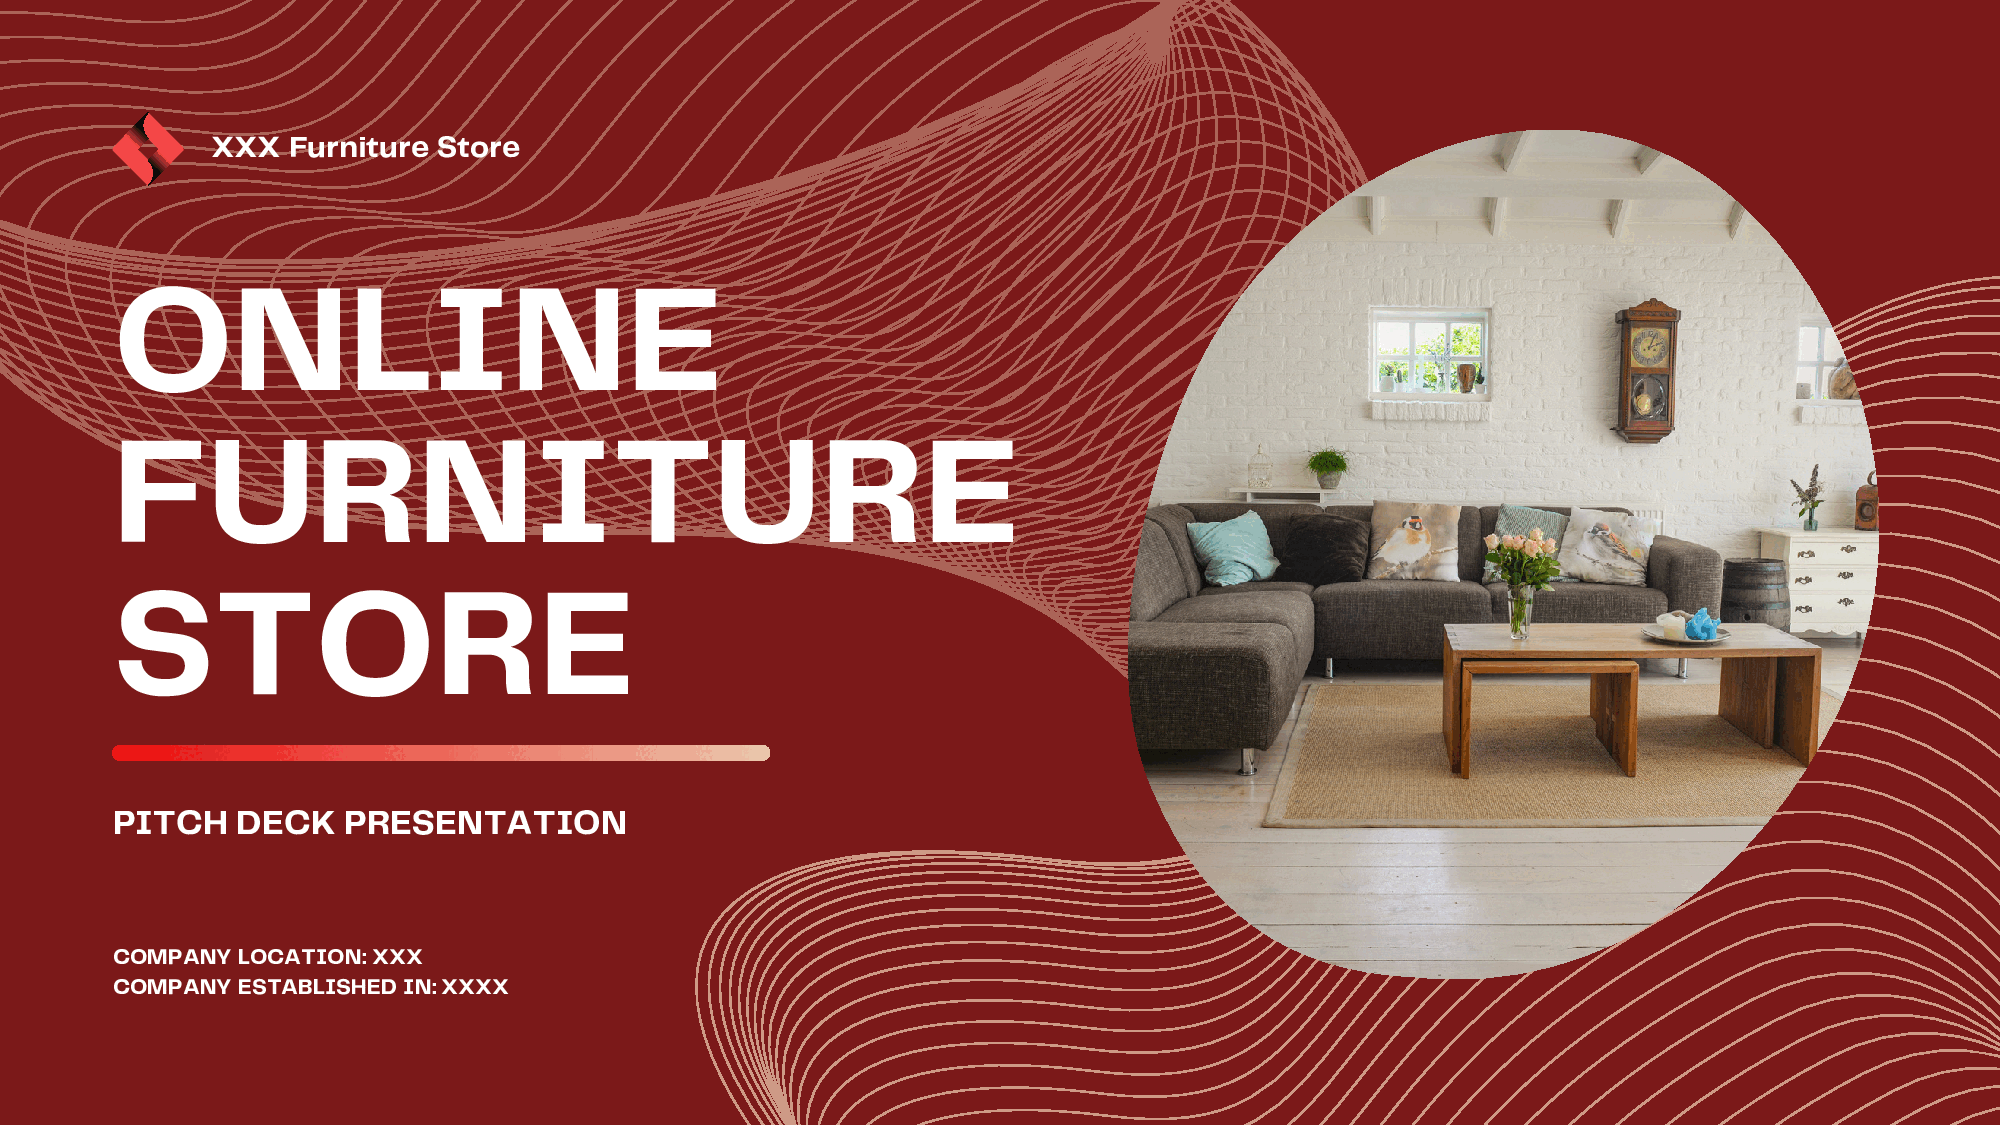 Online Furniture Store Pitch Deck Template